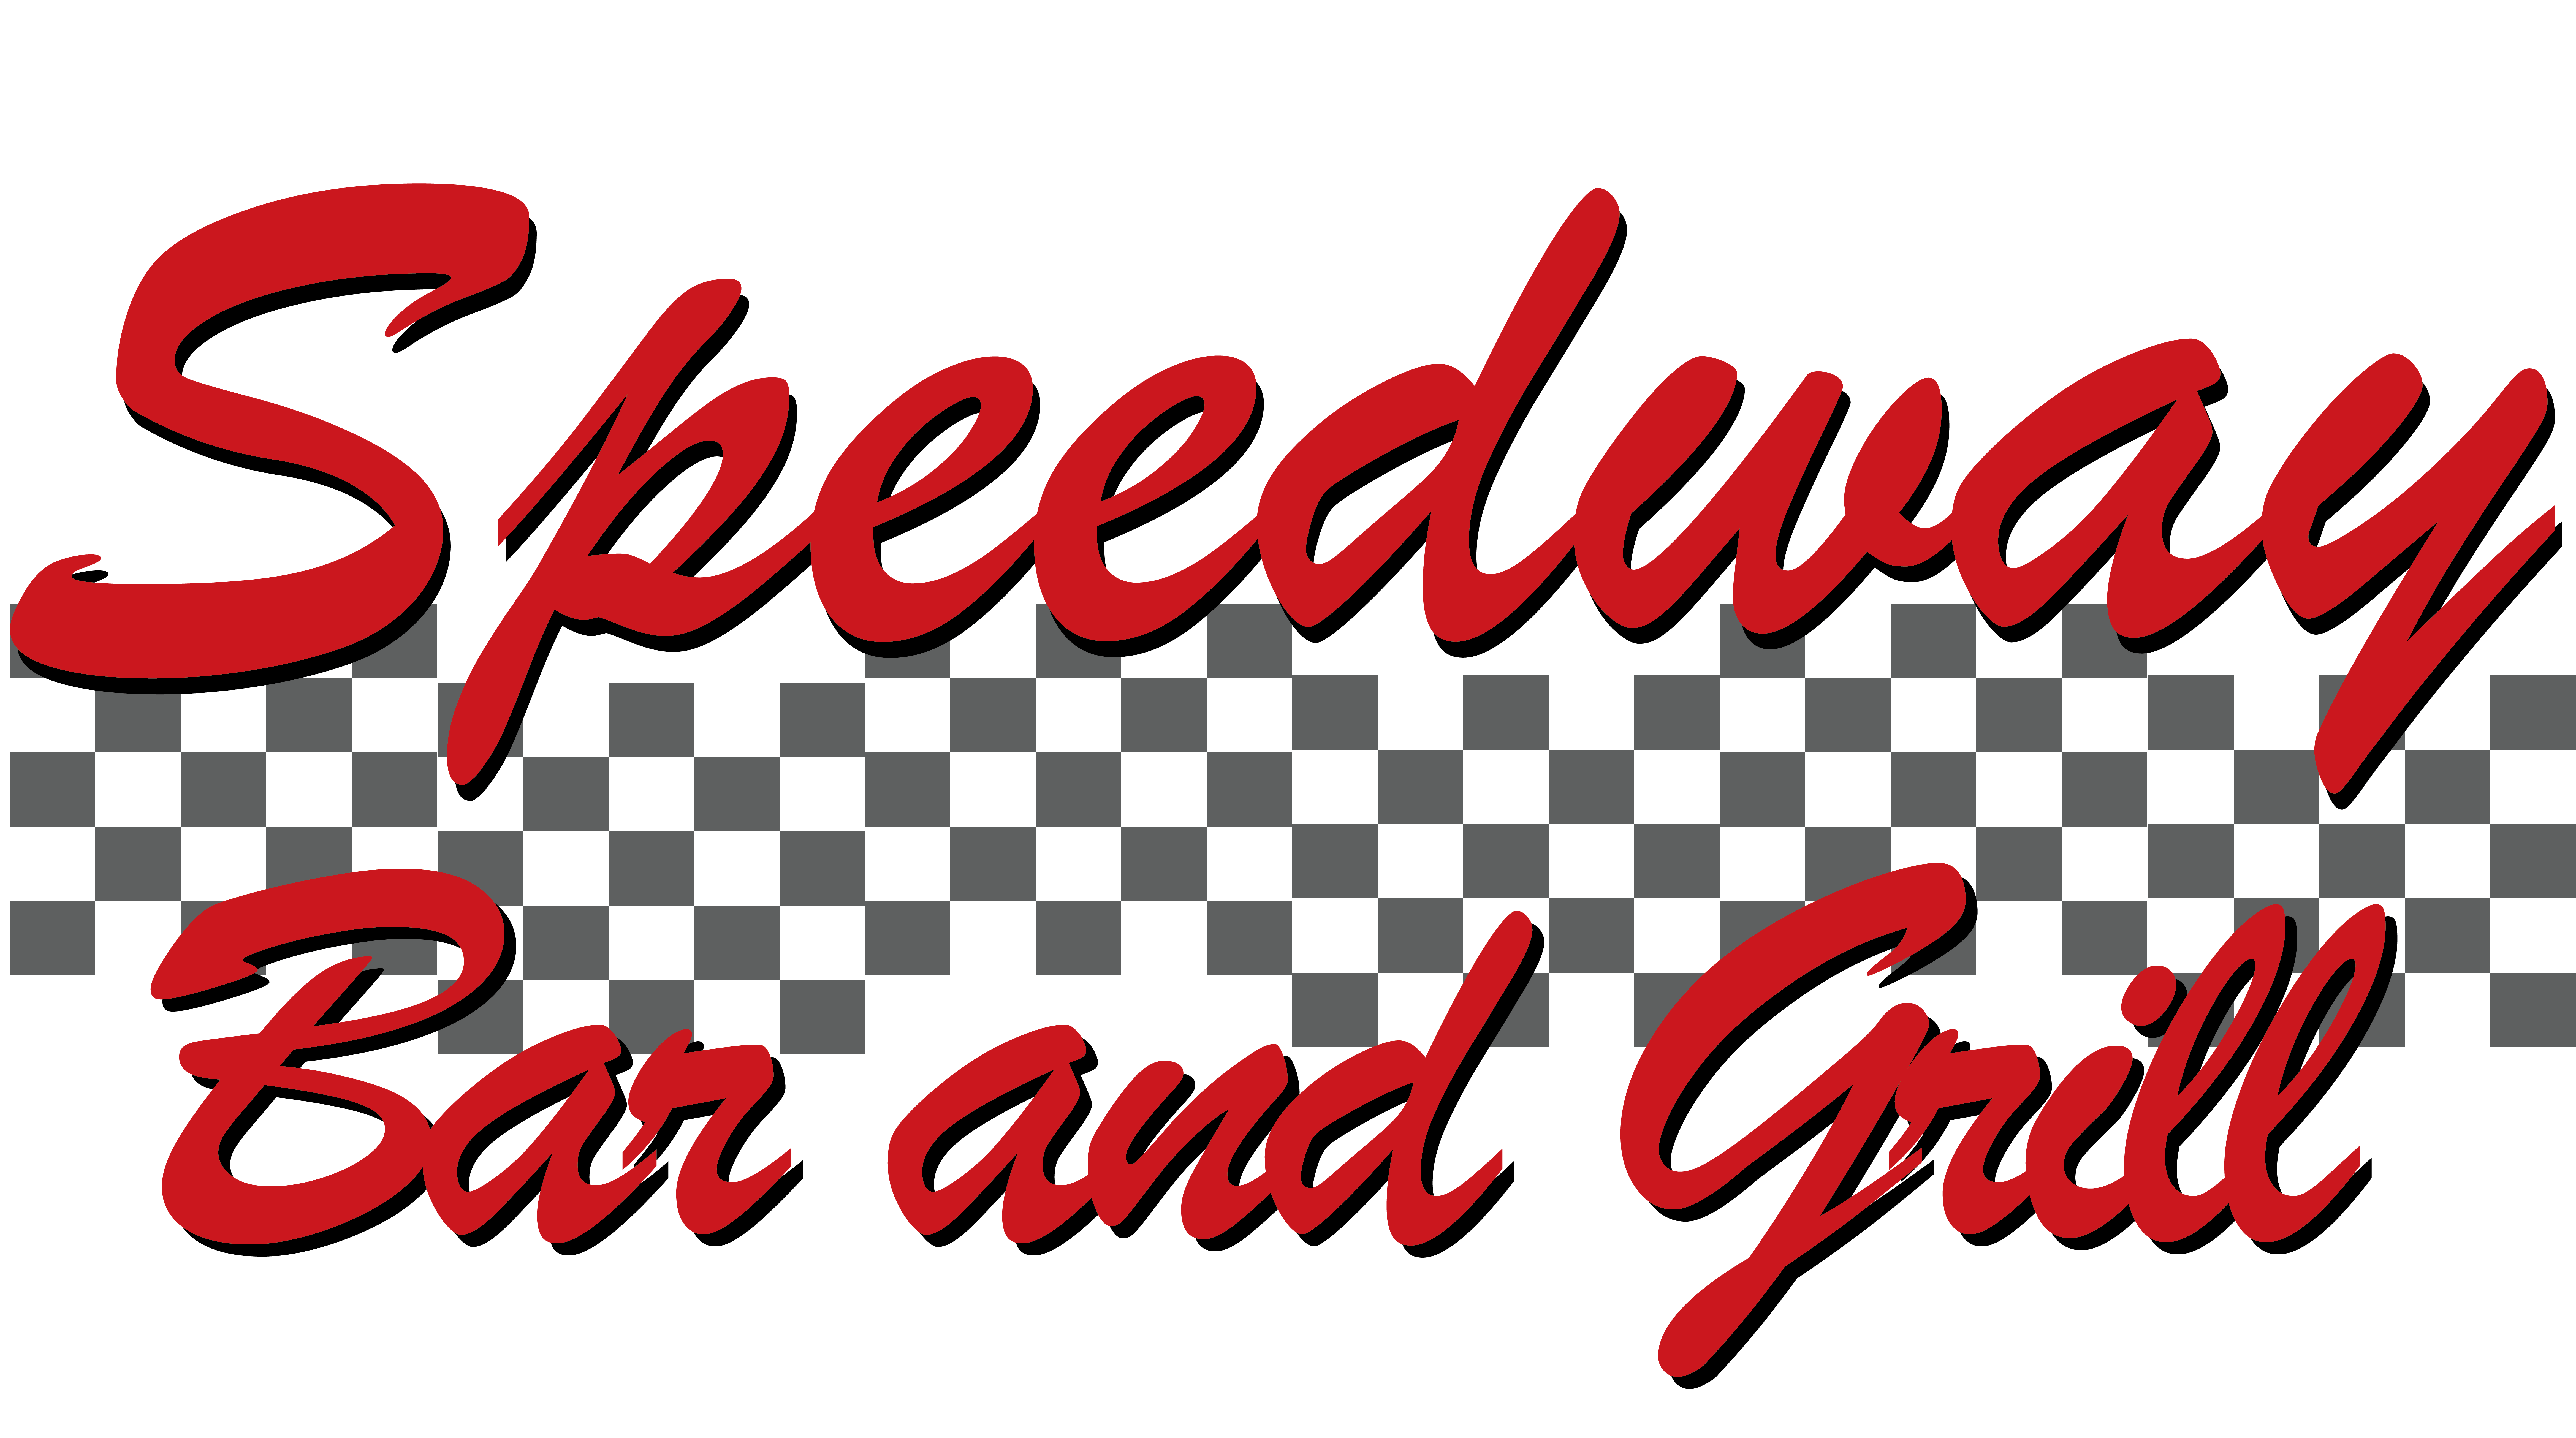 Speedway Bar and Grill